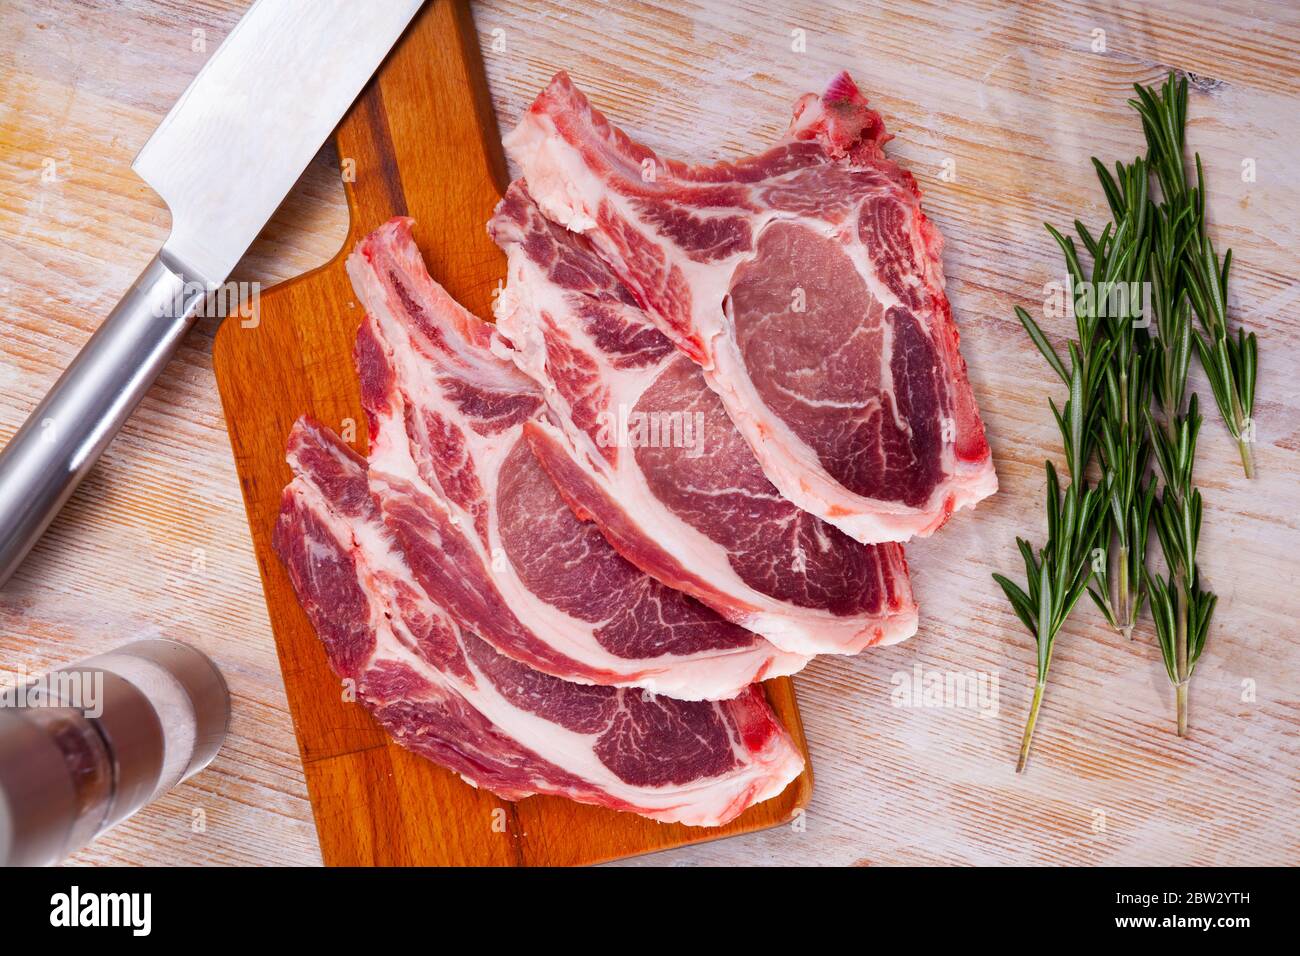 Image of raw pork's  chops and rosemary on wooden surface, nobody Stock Photo